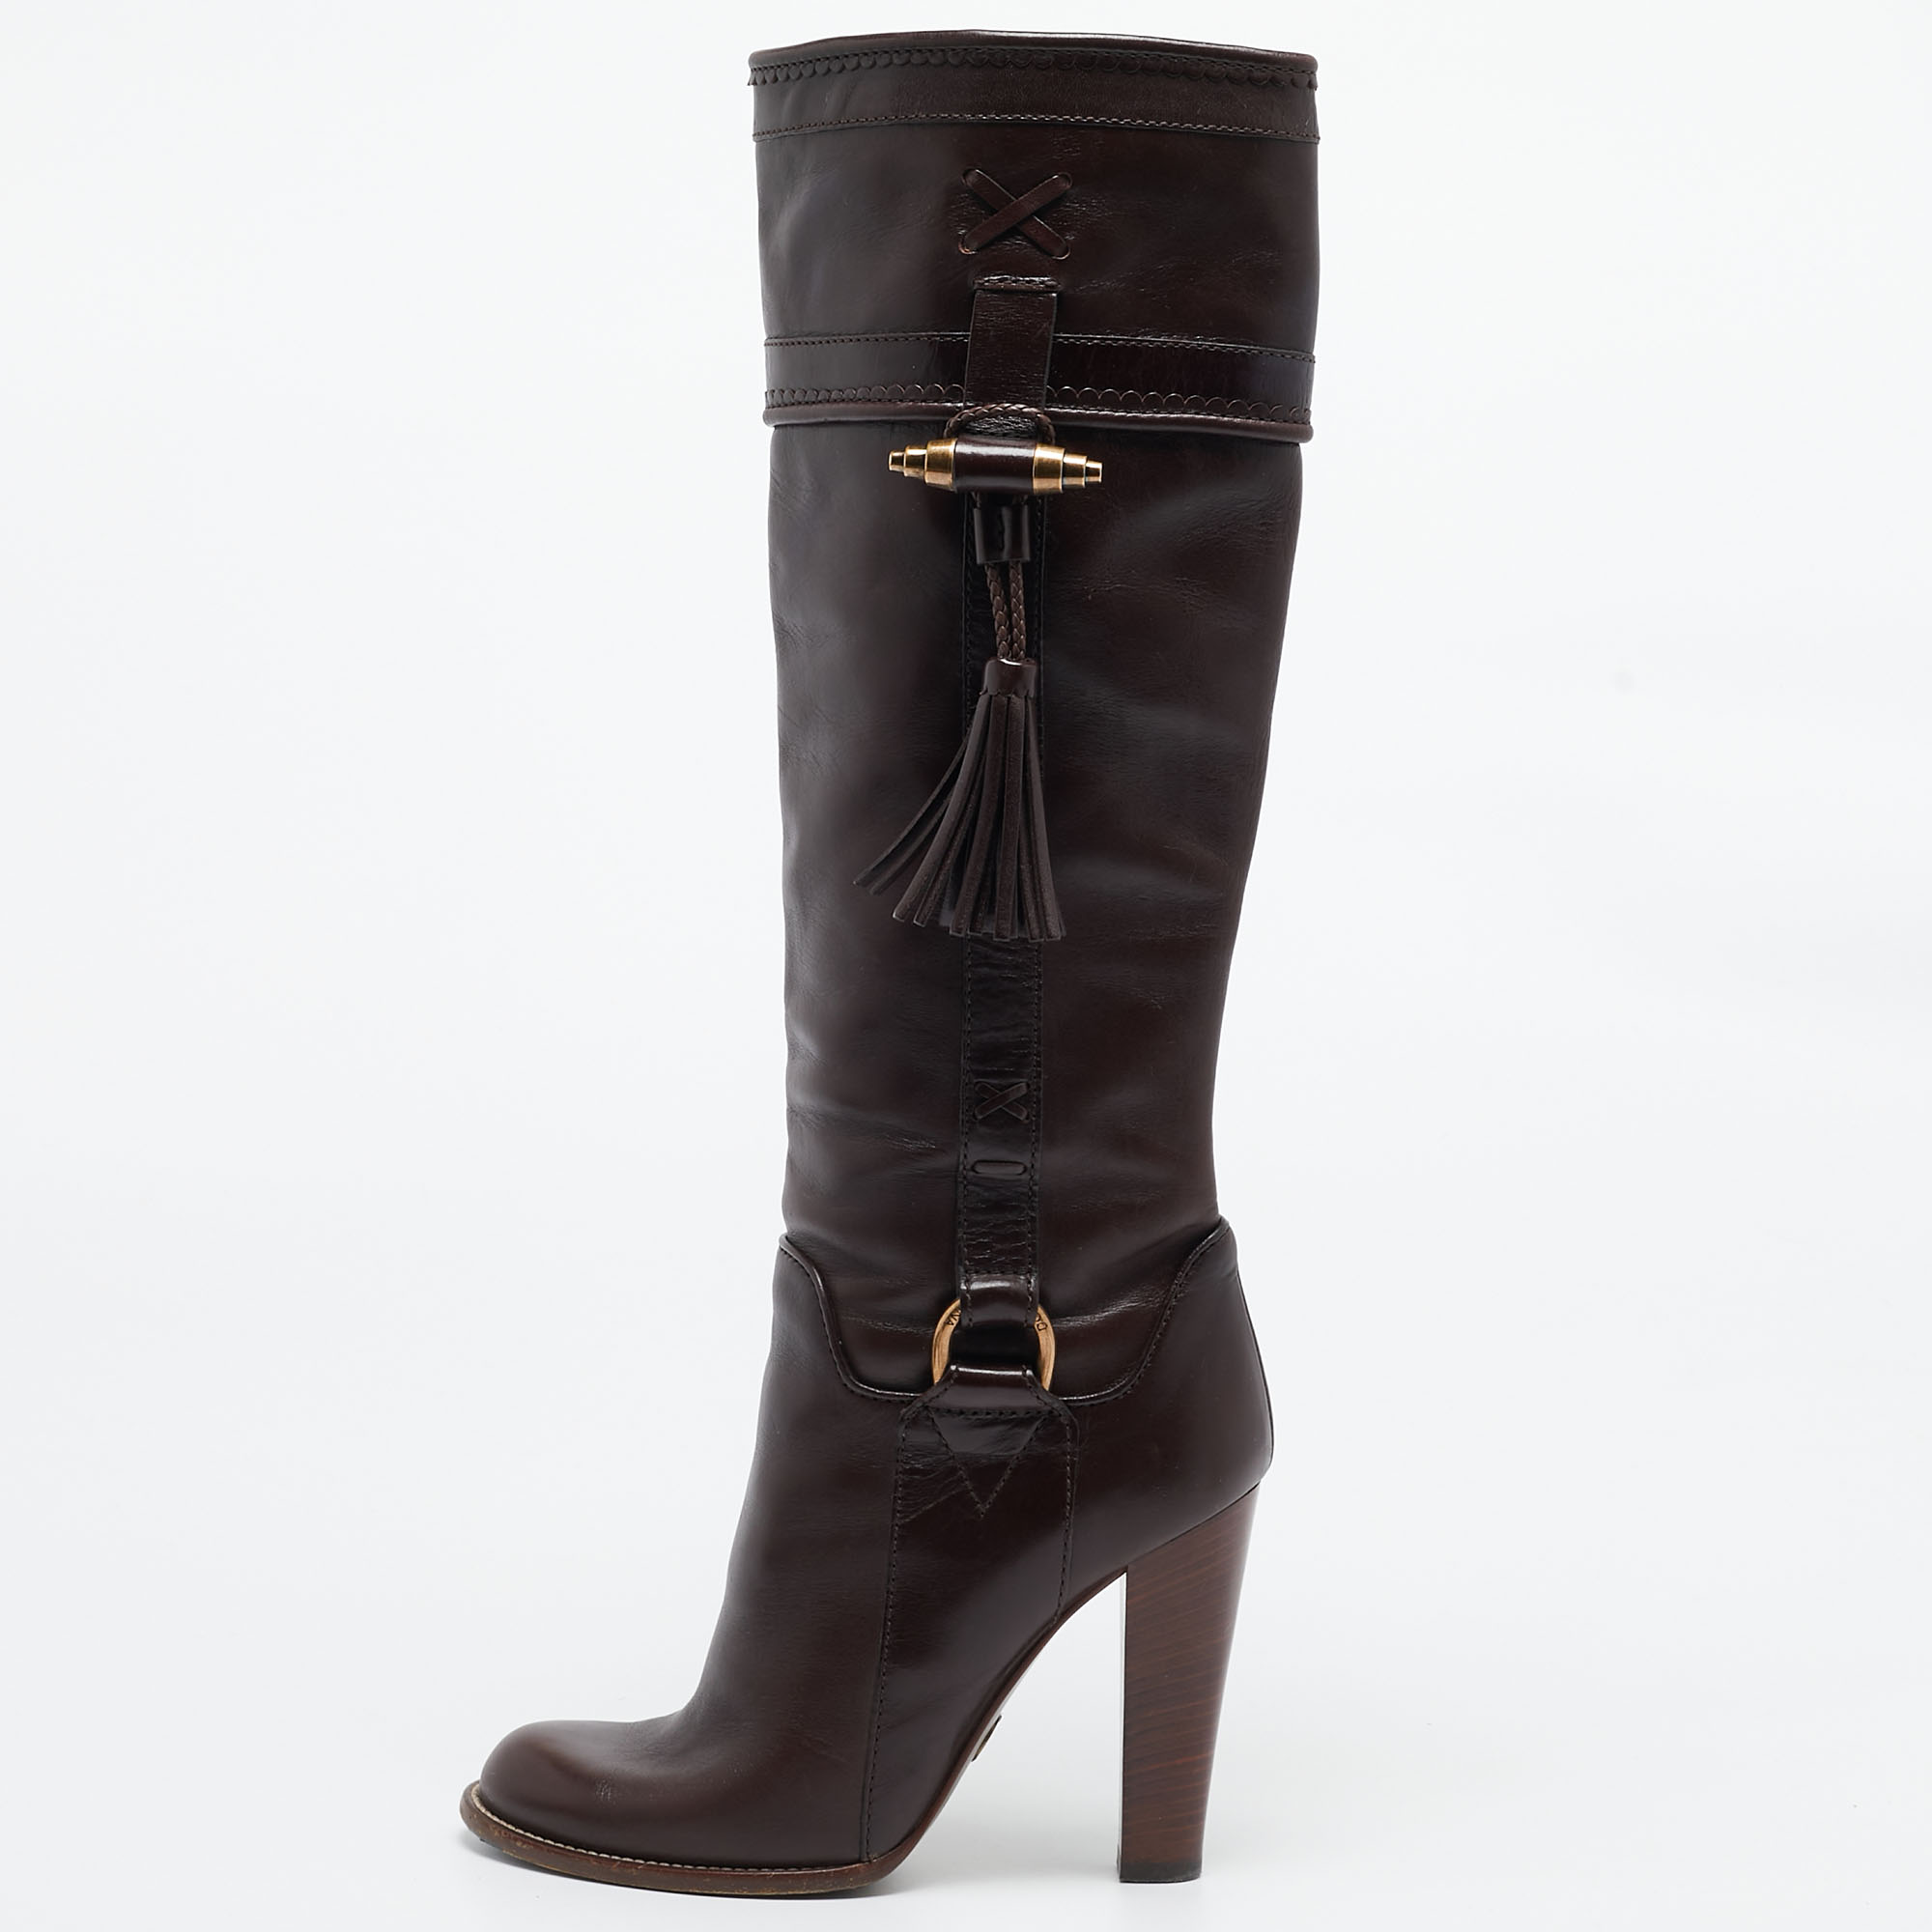 Dolce & gabbana brown leather knee length boots size 37.5